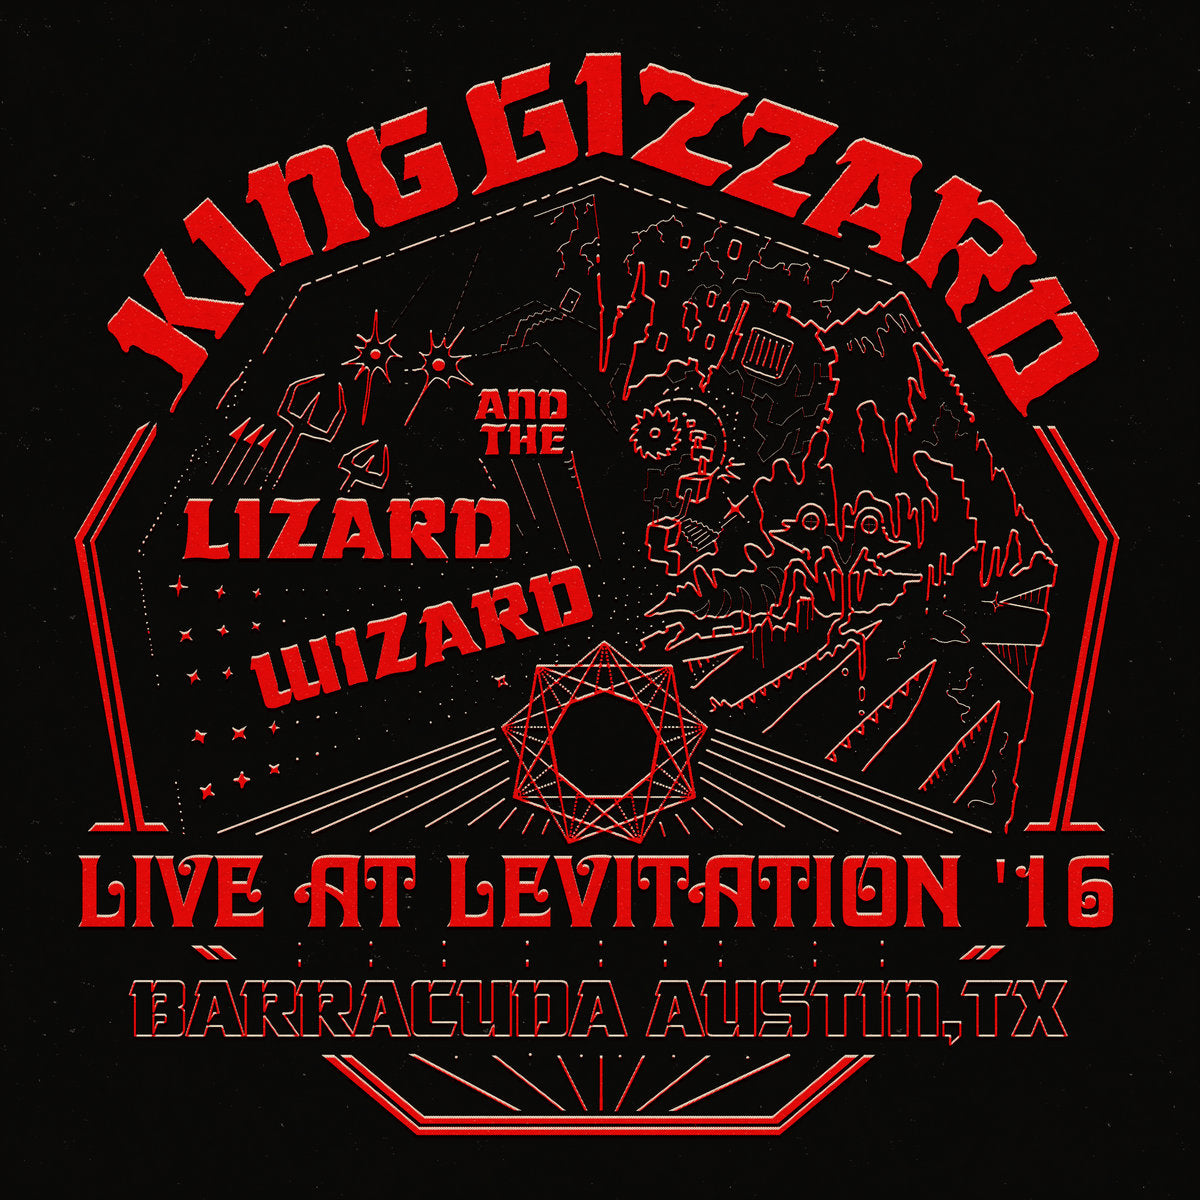 King Gizzard and The Lizard Wizard - Live At Levitation '16 (Red Vinyl)